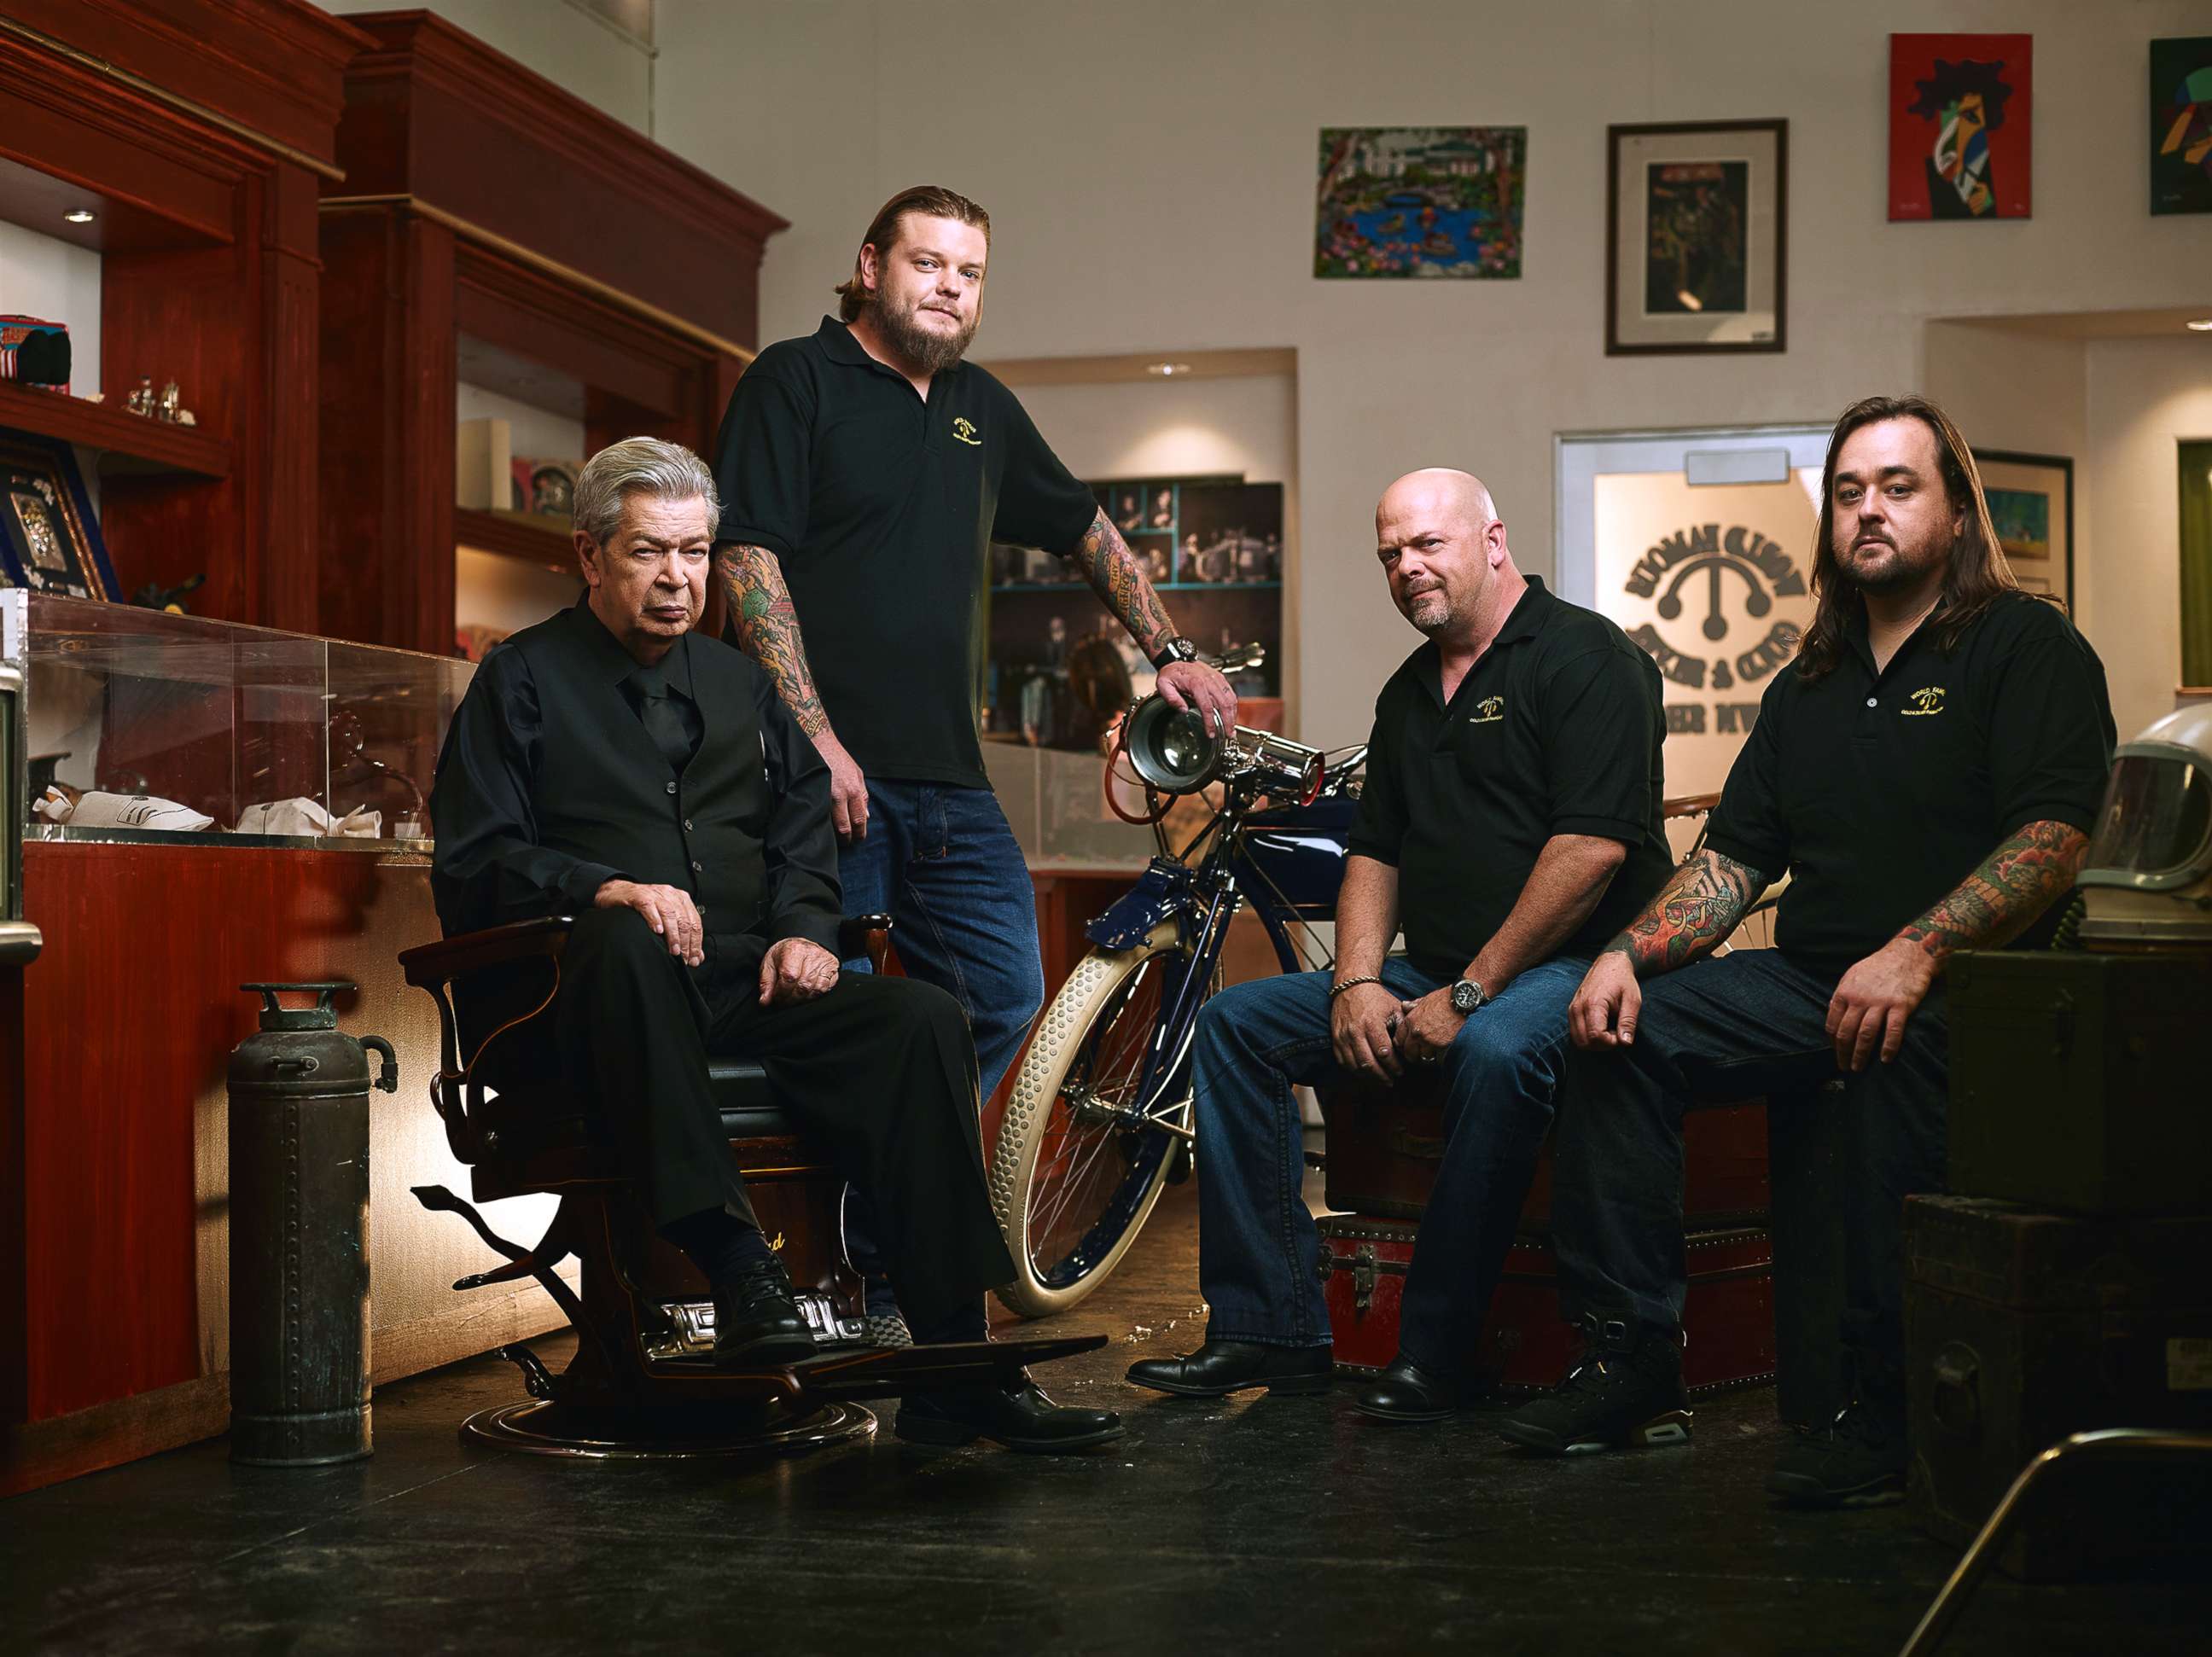 PHOTO: The cast of Pawn Stars, from left, Richard Harrison, Corey Harrison, Rick Harrison and Austin "Chumlee" Russell.